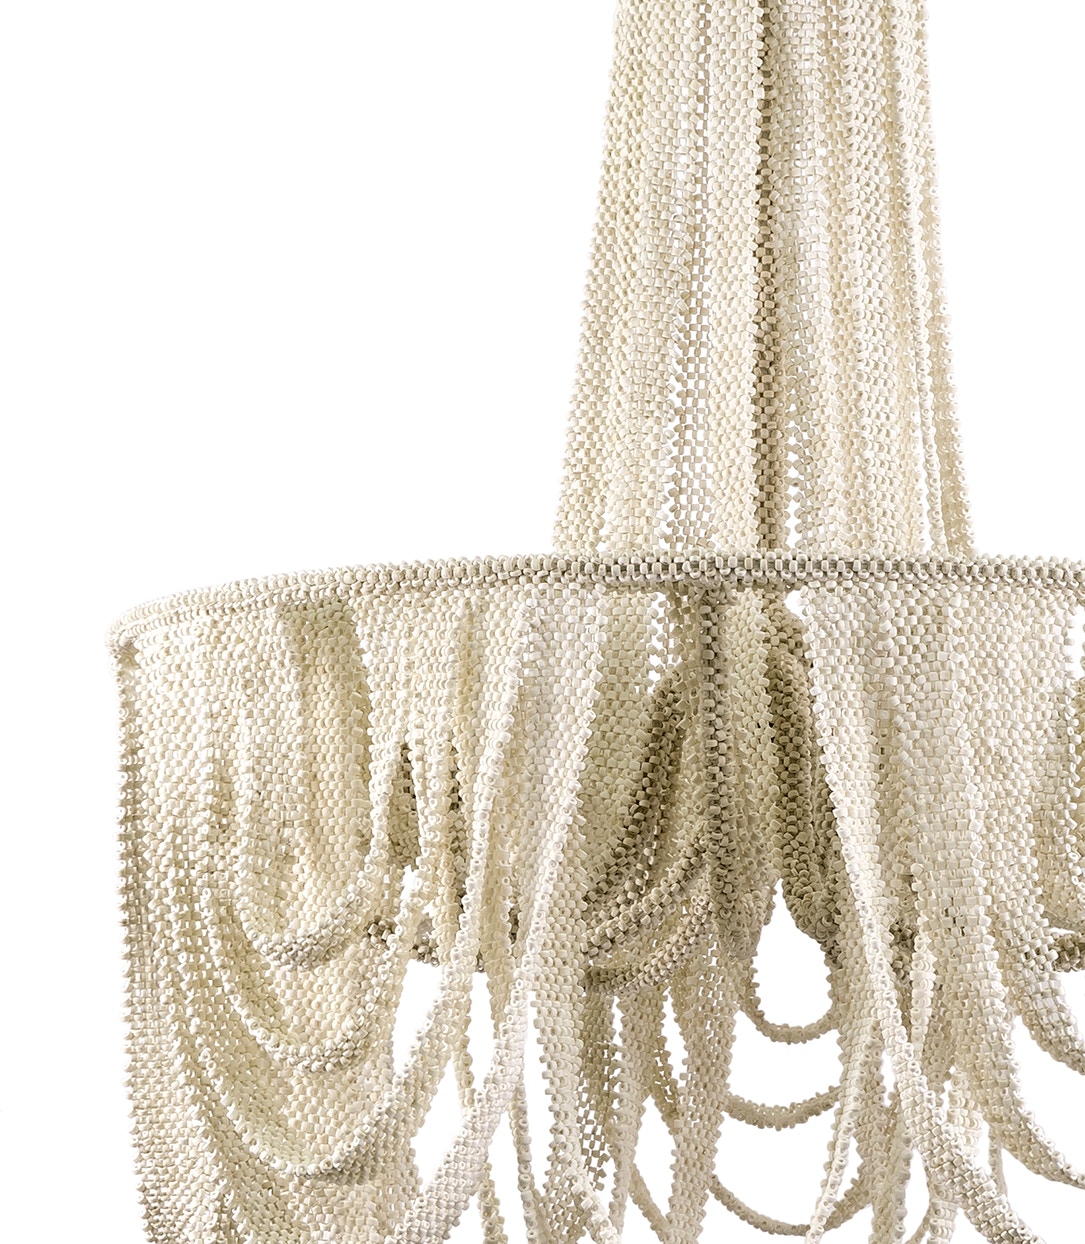 A chandelier with a fringe of handmade beads - Model Venezia 4800-S